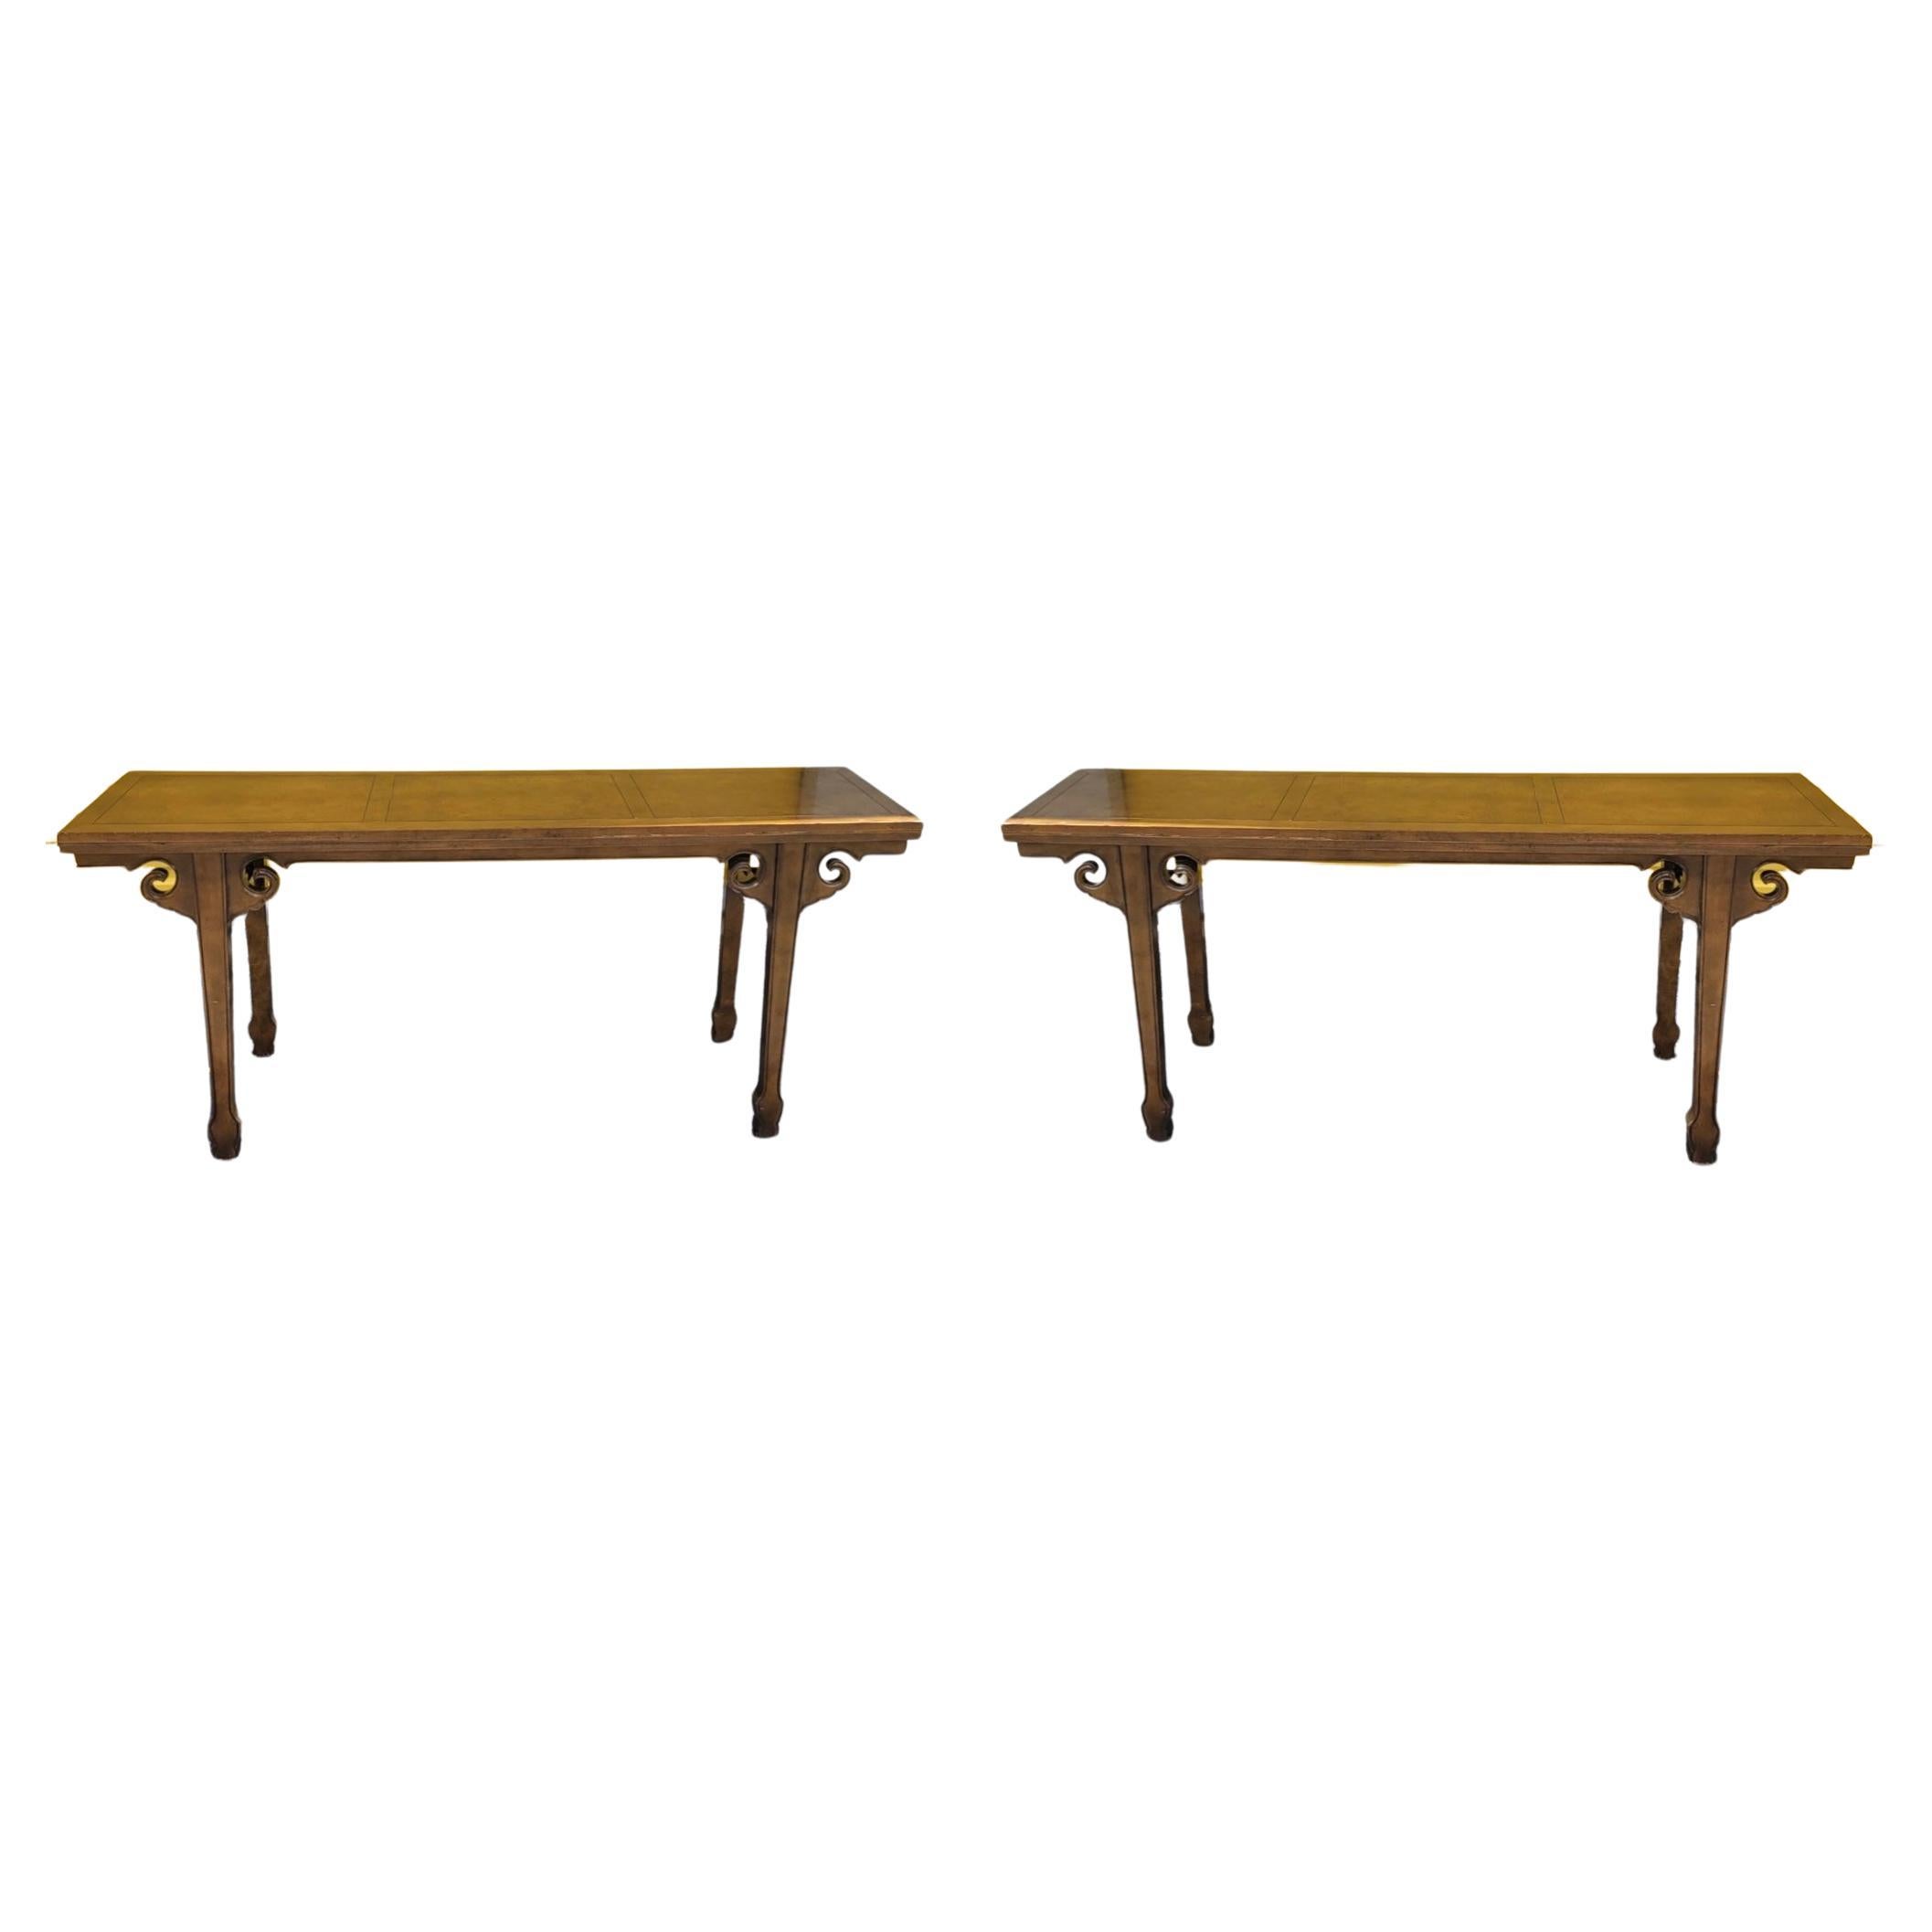 This is a pair of 1970S flip top console tables with Ming styling by Drexel Heritage. They open and slide into great serving surfaces! Form, function and fun!